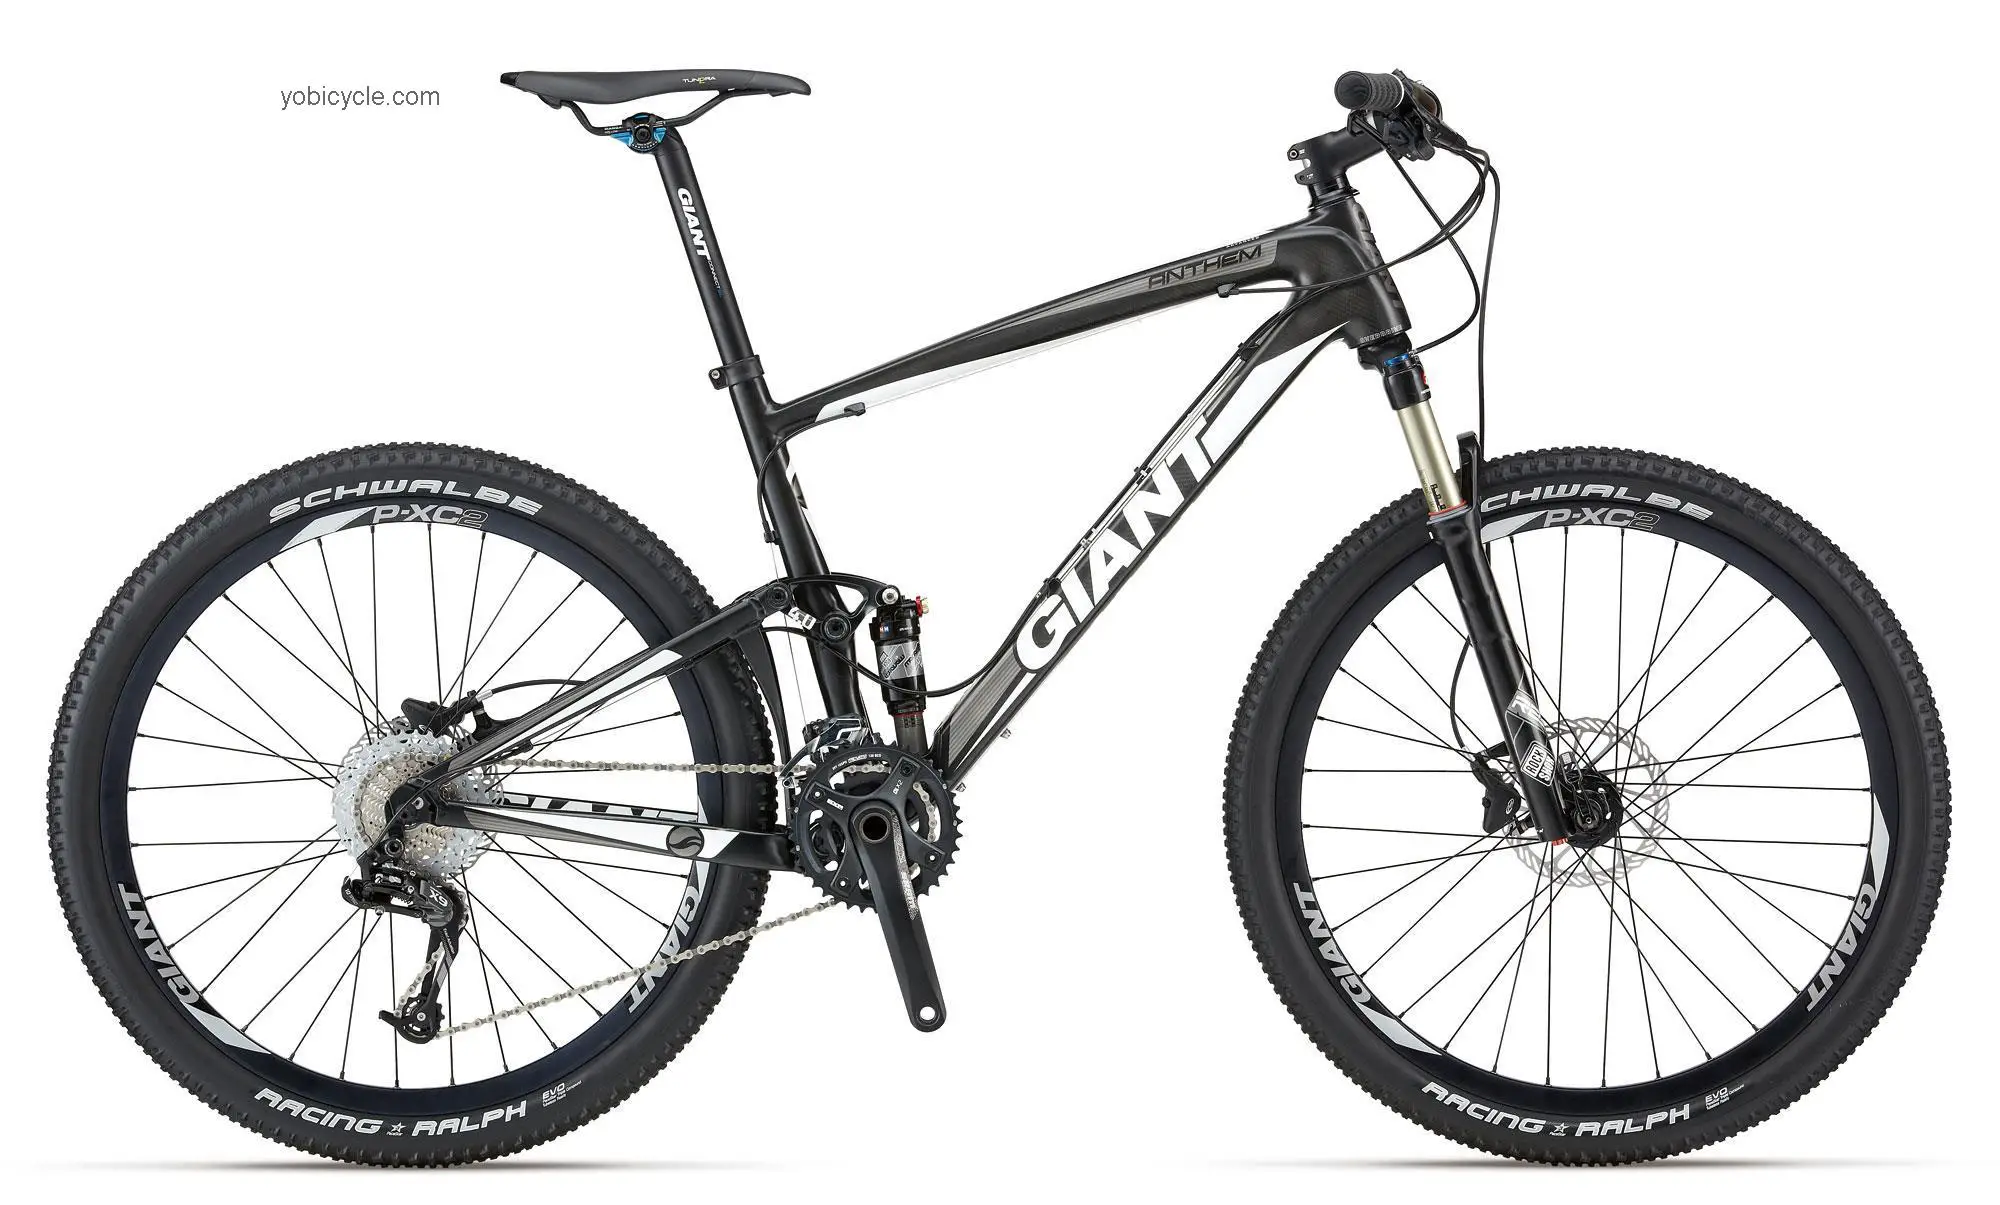 Giant Anthem Advanced 2 2012 comparison online with competitors